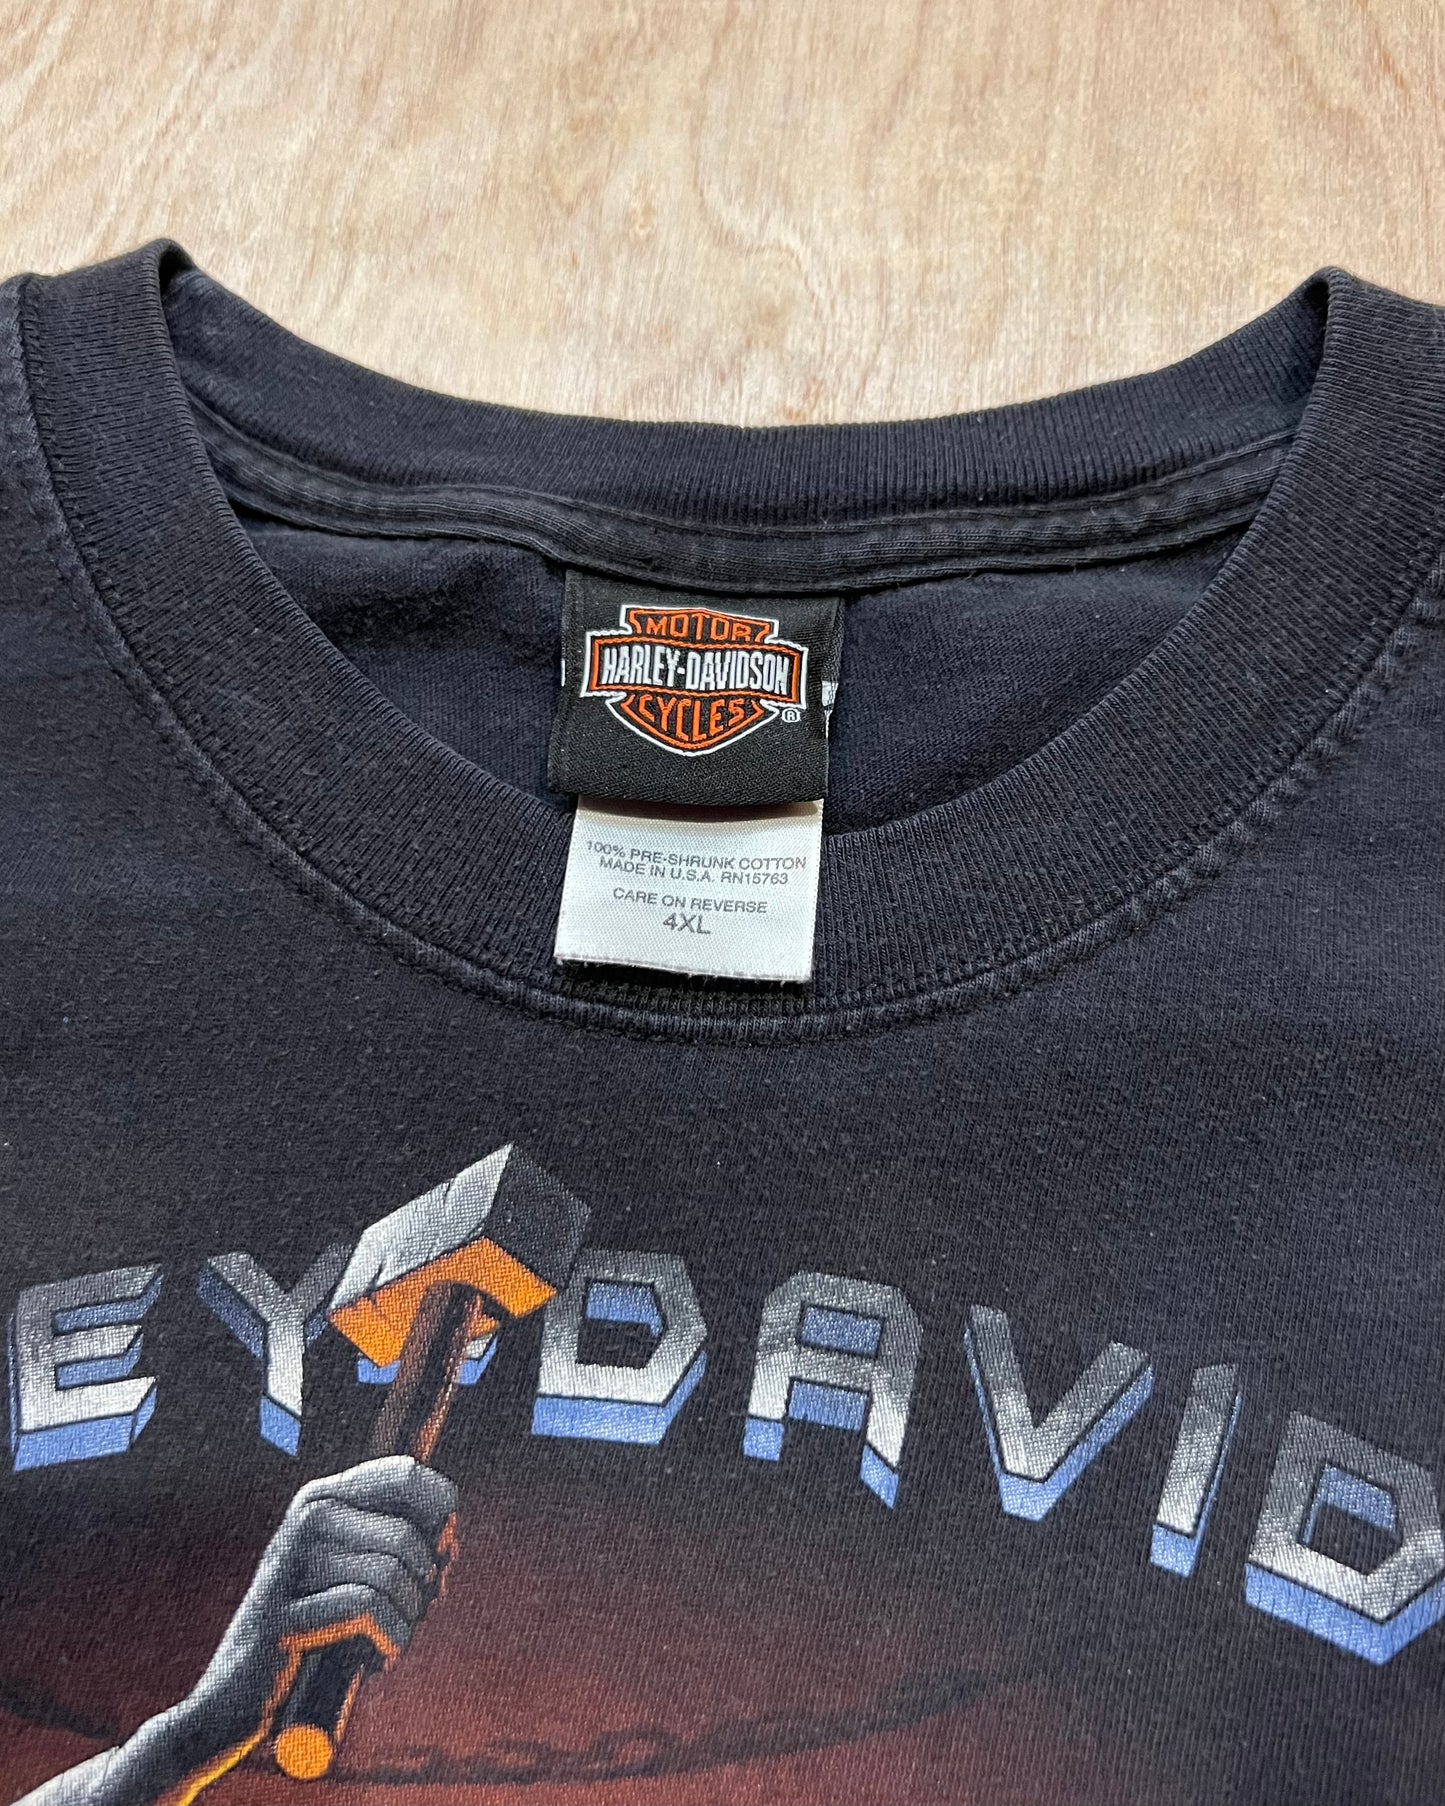 Harley Davidson "Forged In Iron" Starved Rock, IL T-Shirt